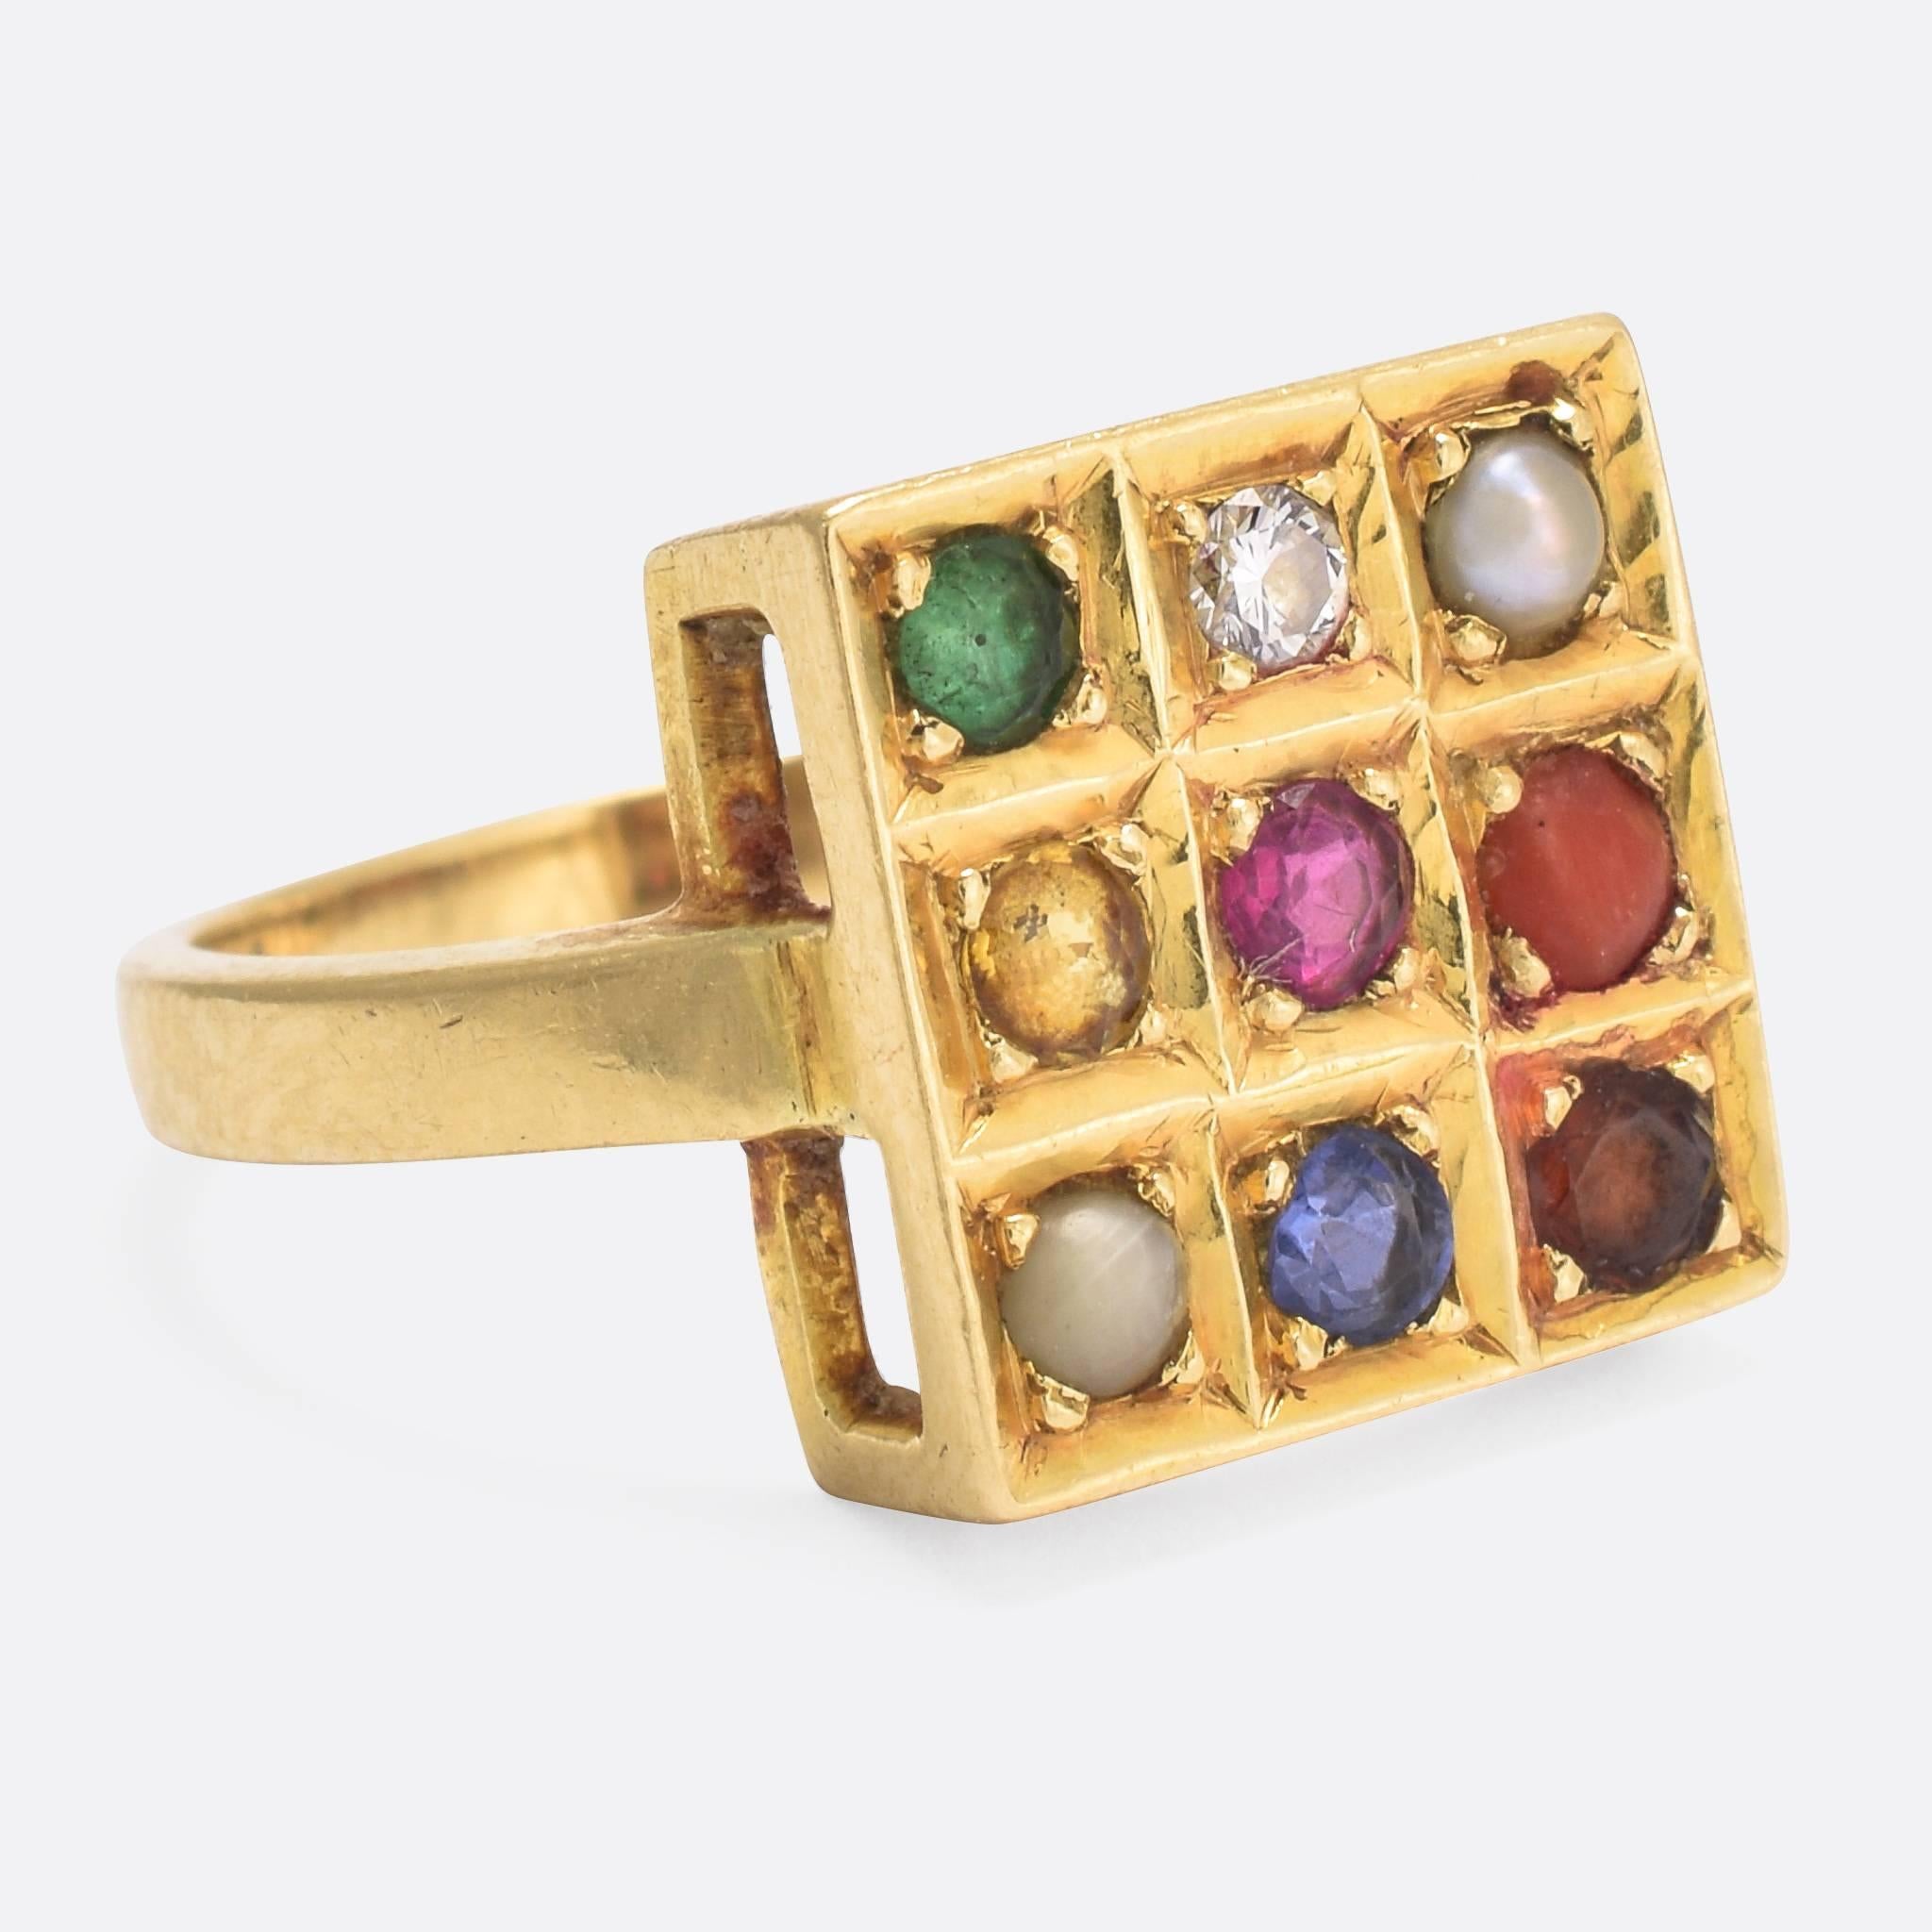 A wonderful vintage Navaratna ring, modelled in 18k gold and dating to the 1950s. Navaratna jewellery is always set with nine stones, each one represents a different celestial body from our solar system. Late Thai astrologer Horacharn Thep